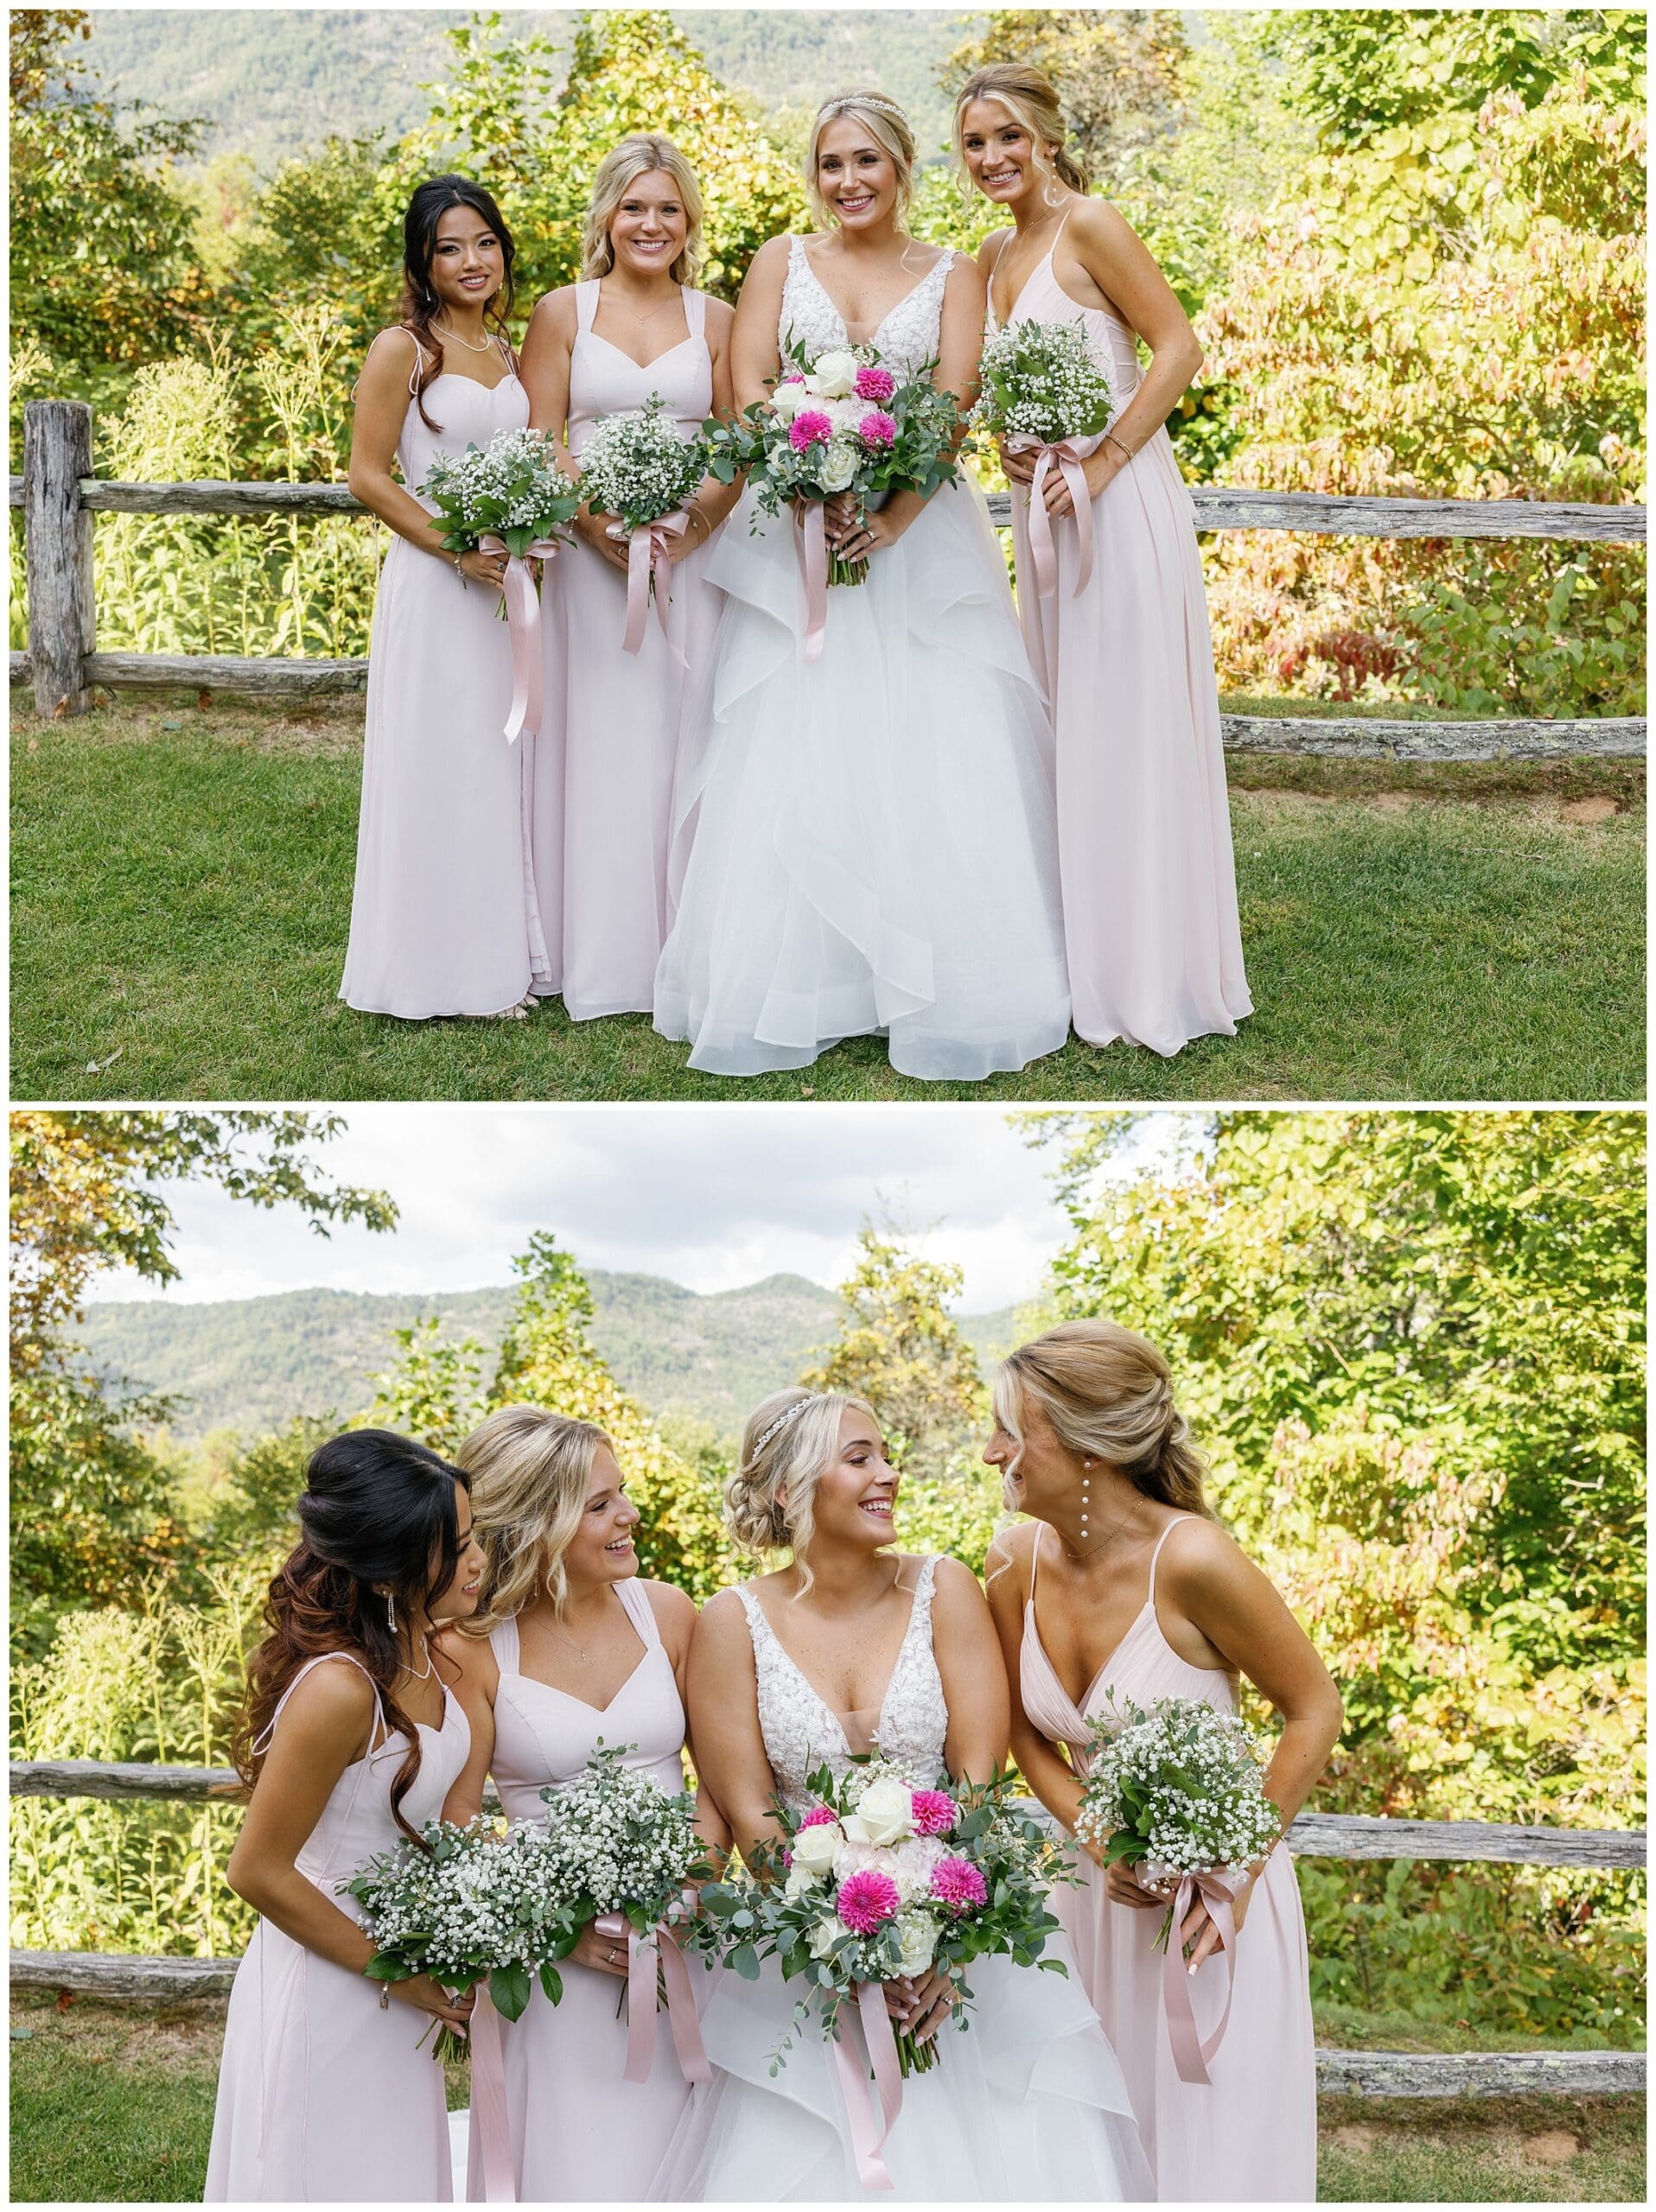 A bride and her bridesmaids in pink dresses with mountains in the background.